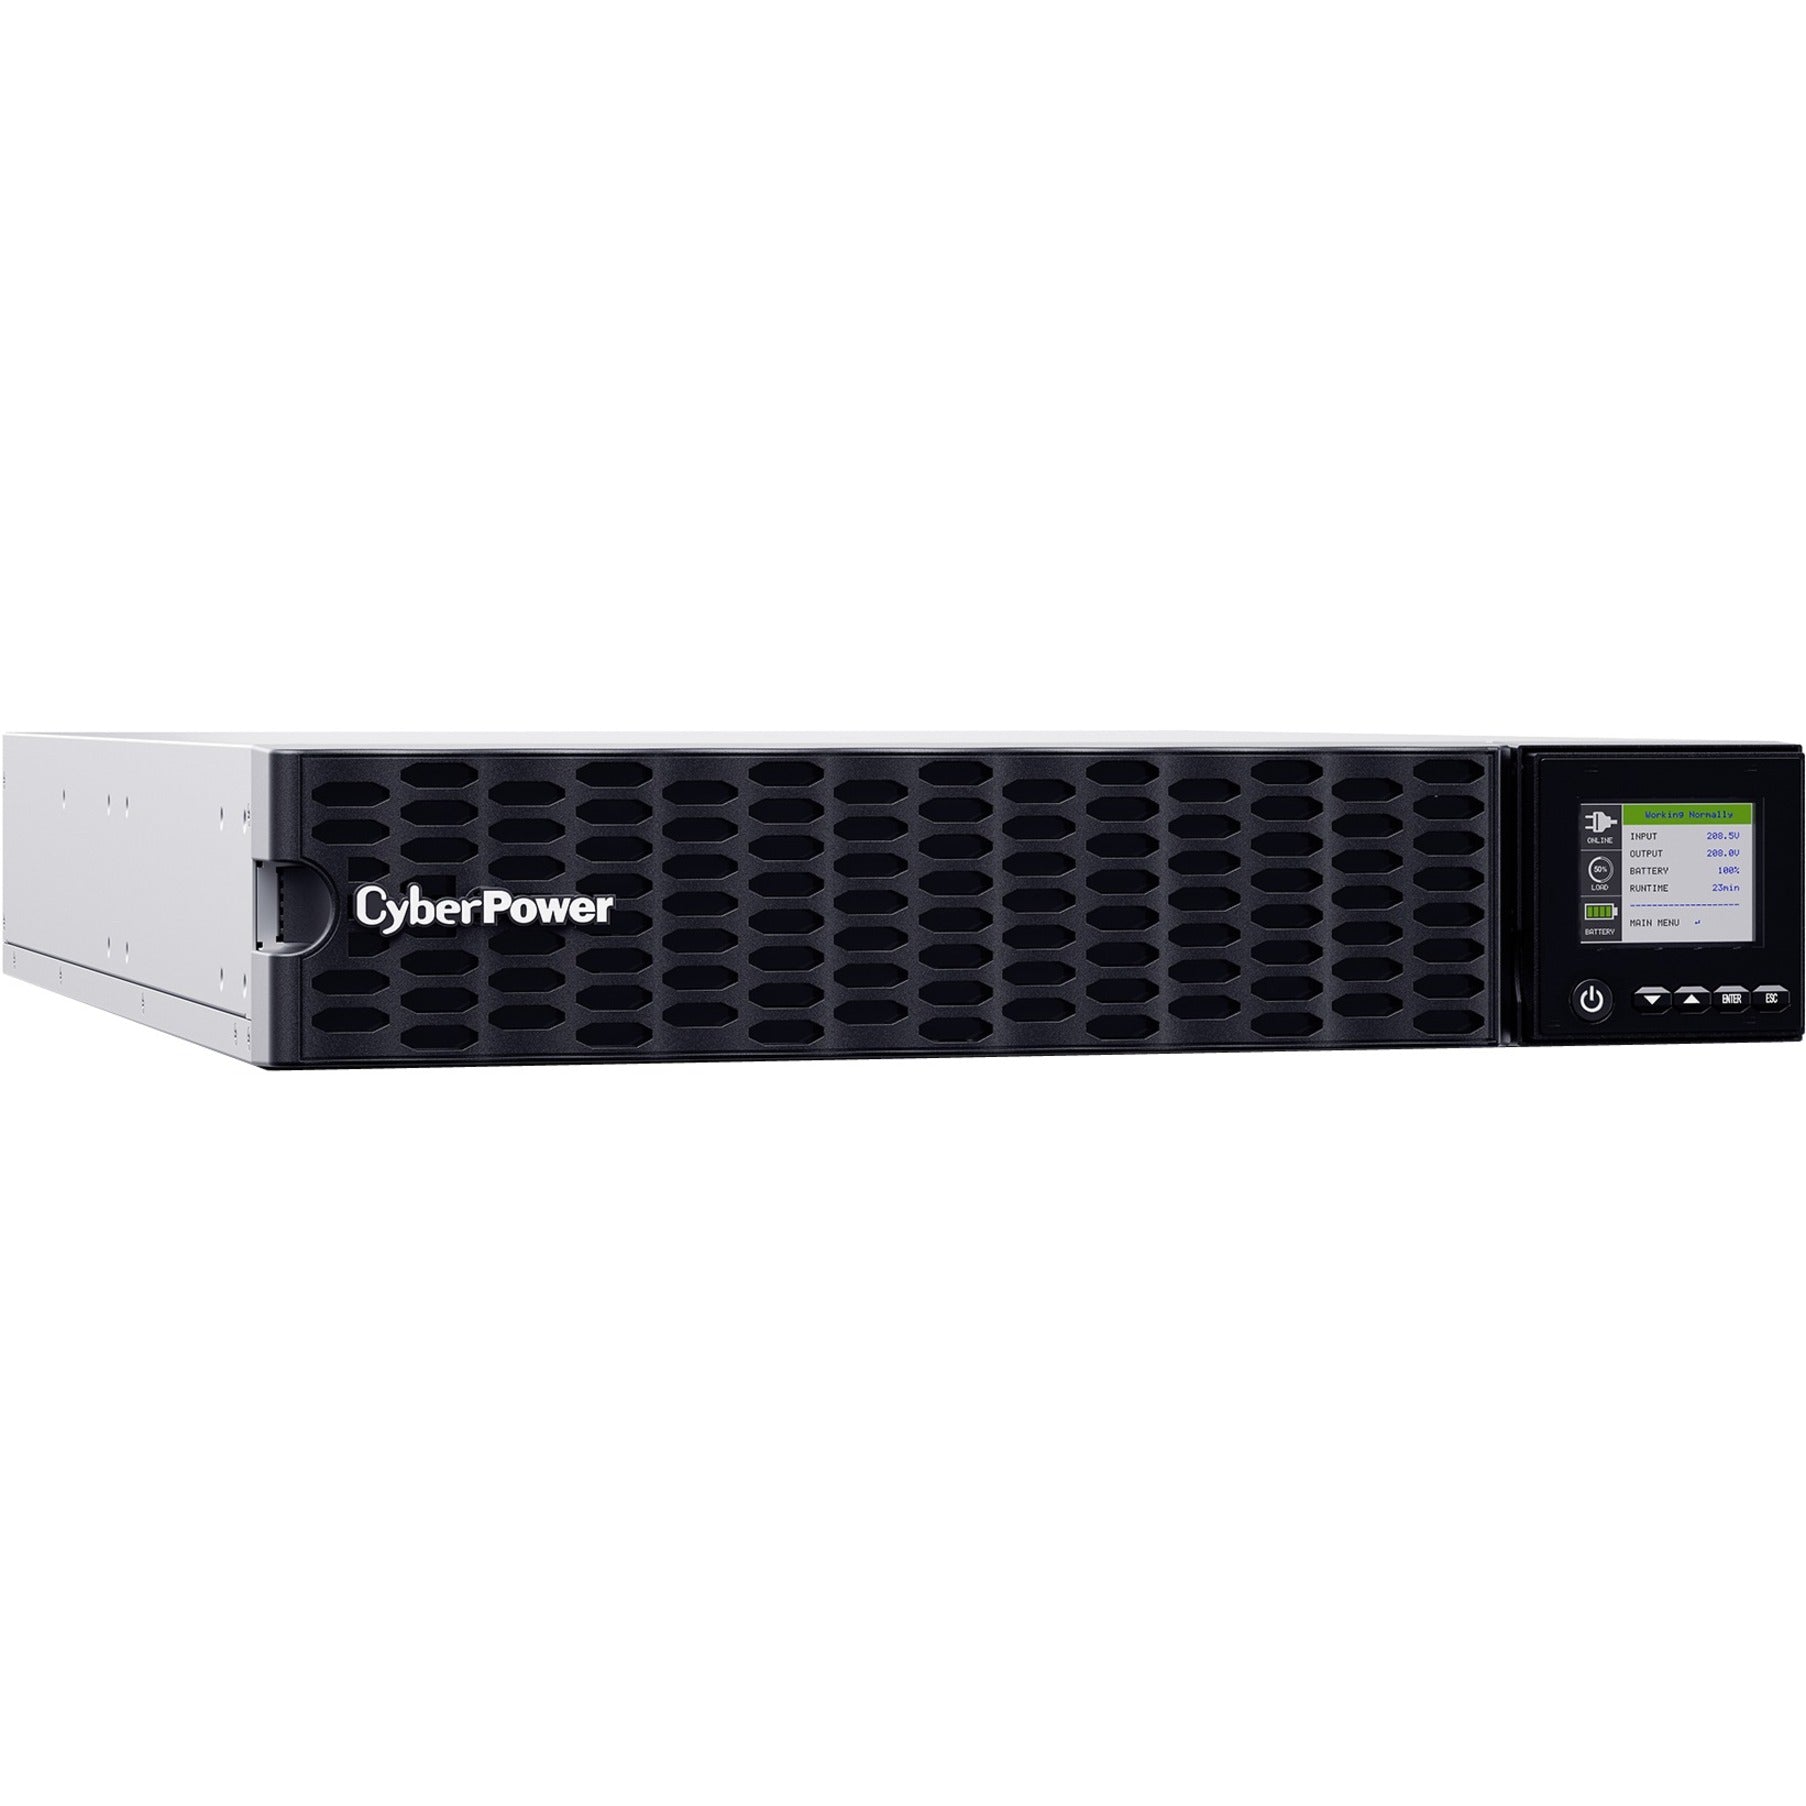 CyberPower OL5KRTHD Smart App Online UPS Systems, 5KVA Tower/Rack Convertible, Energy Saving, SNMP/HTTP Remote Monitoring